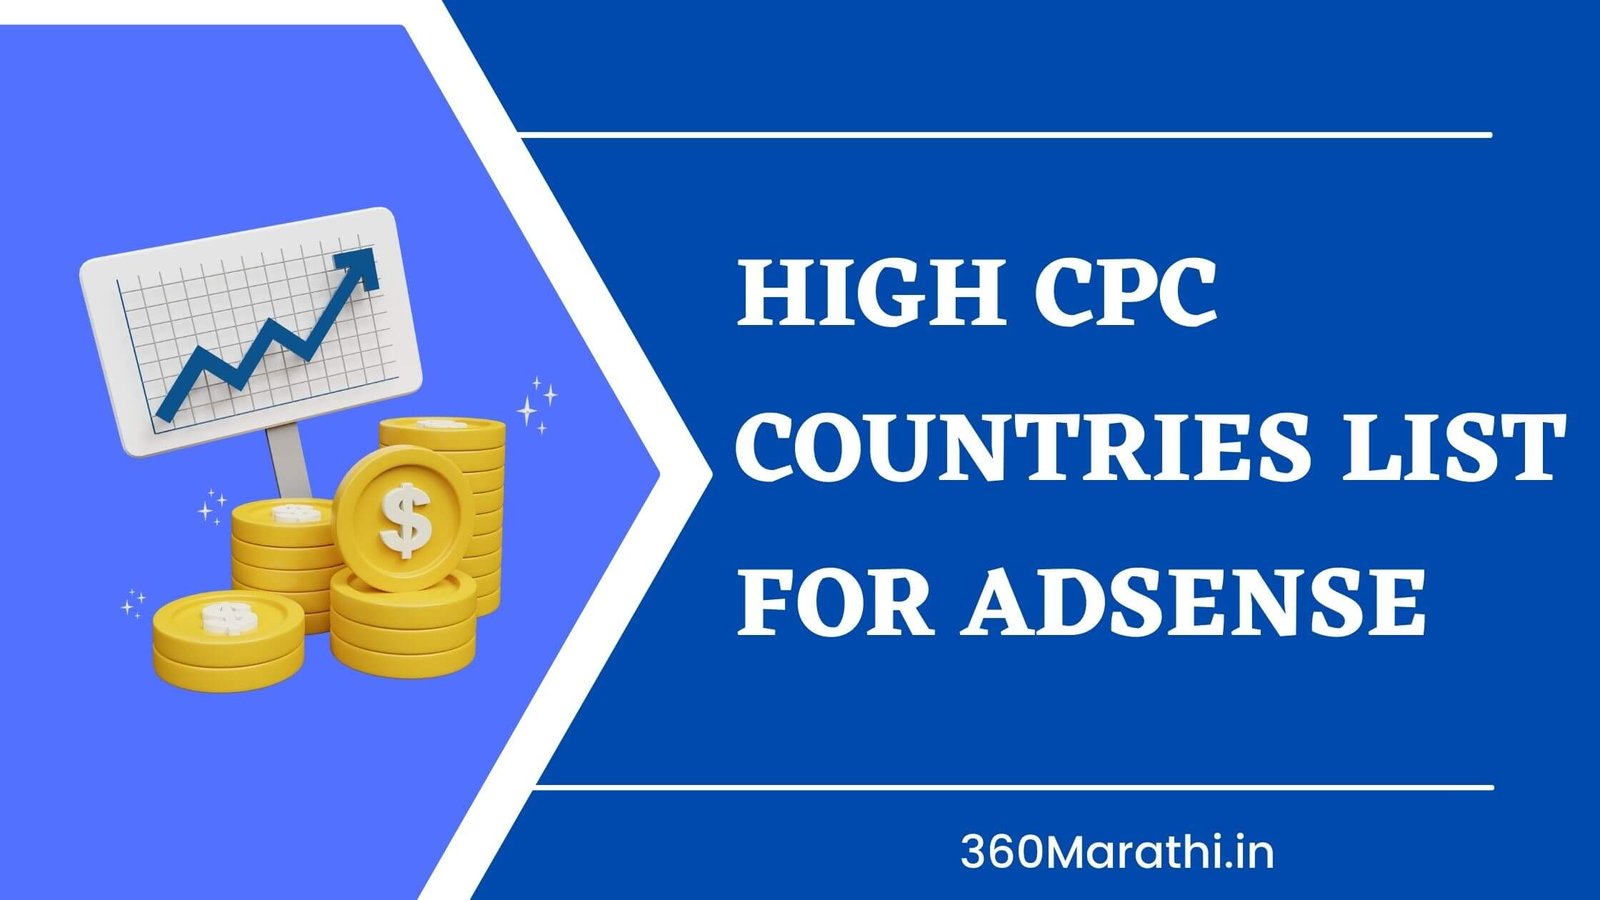 High CPC Countries List For Adsense in 2022